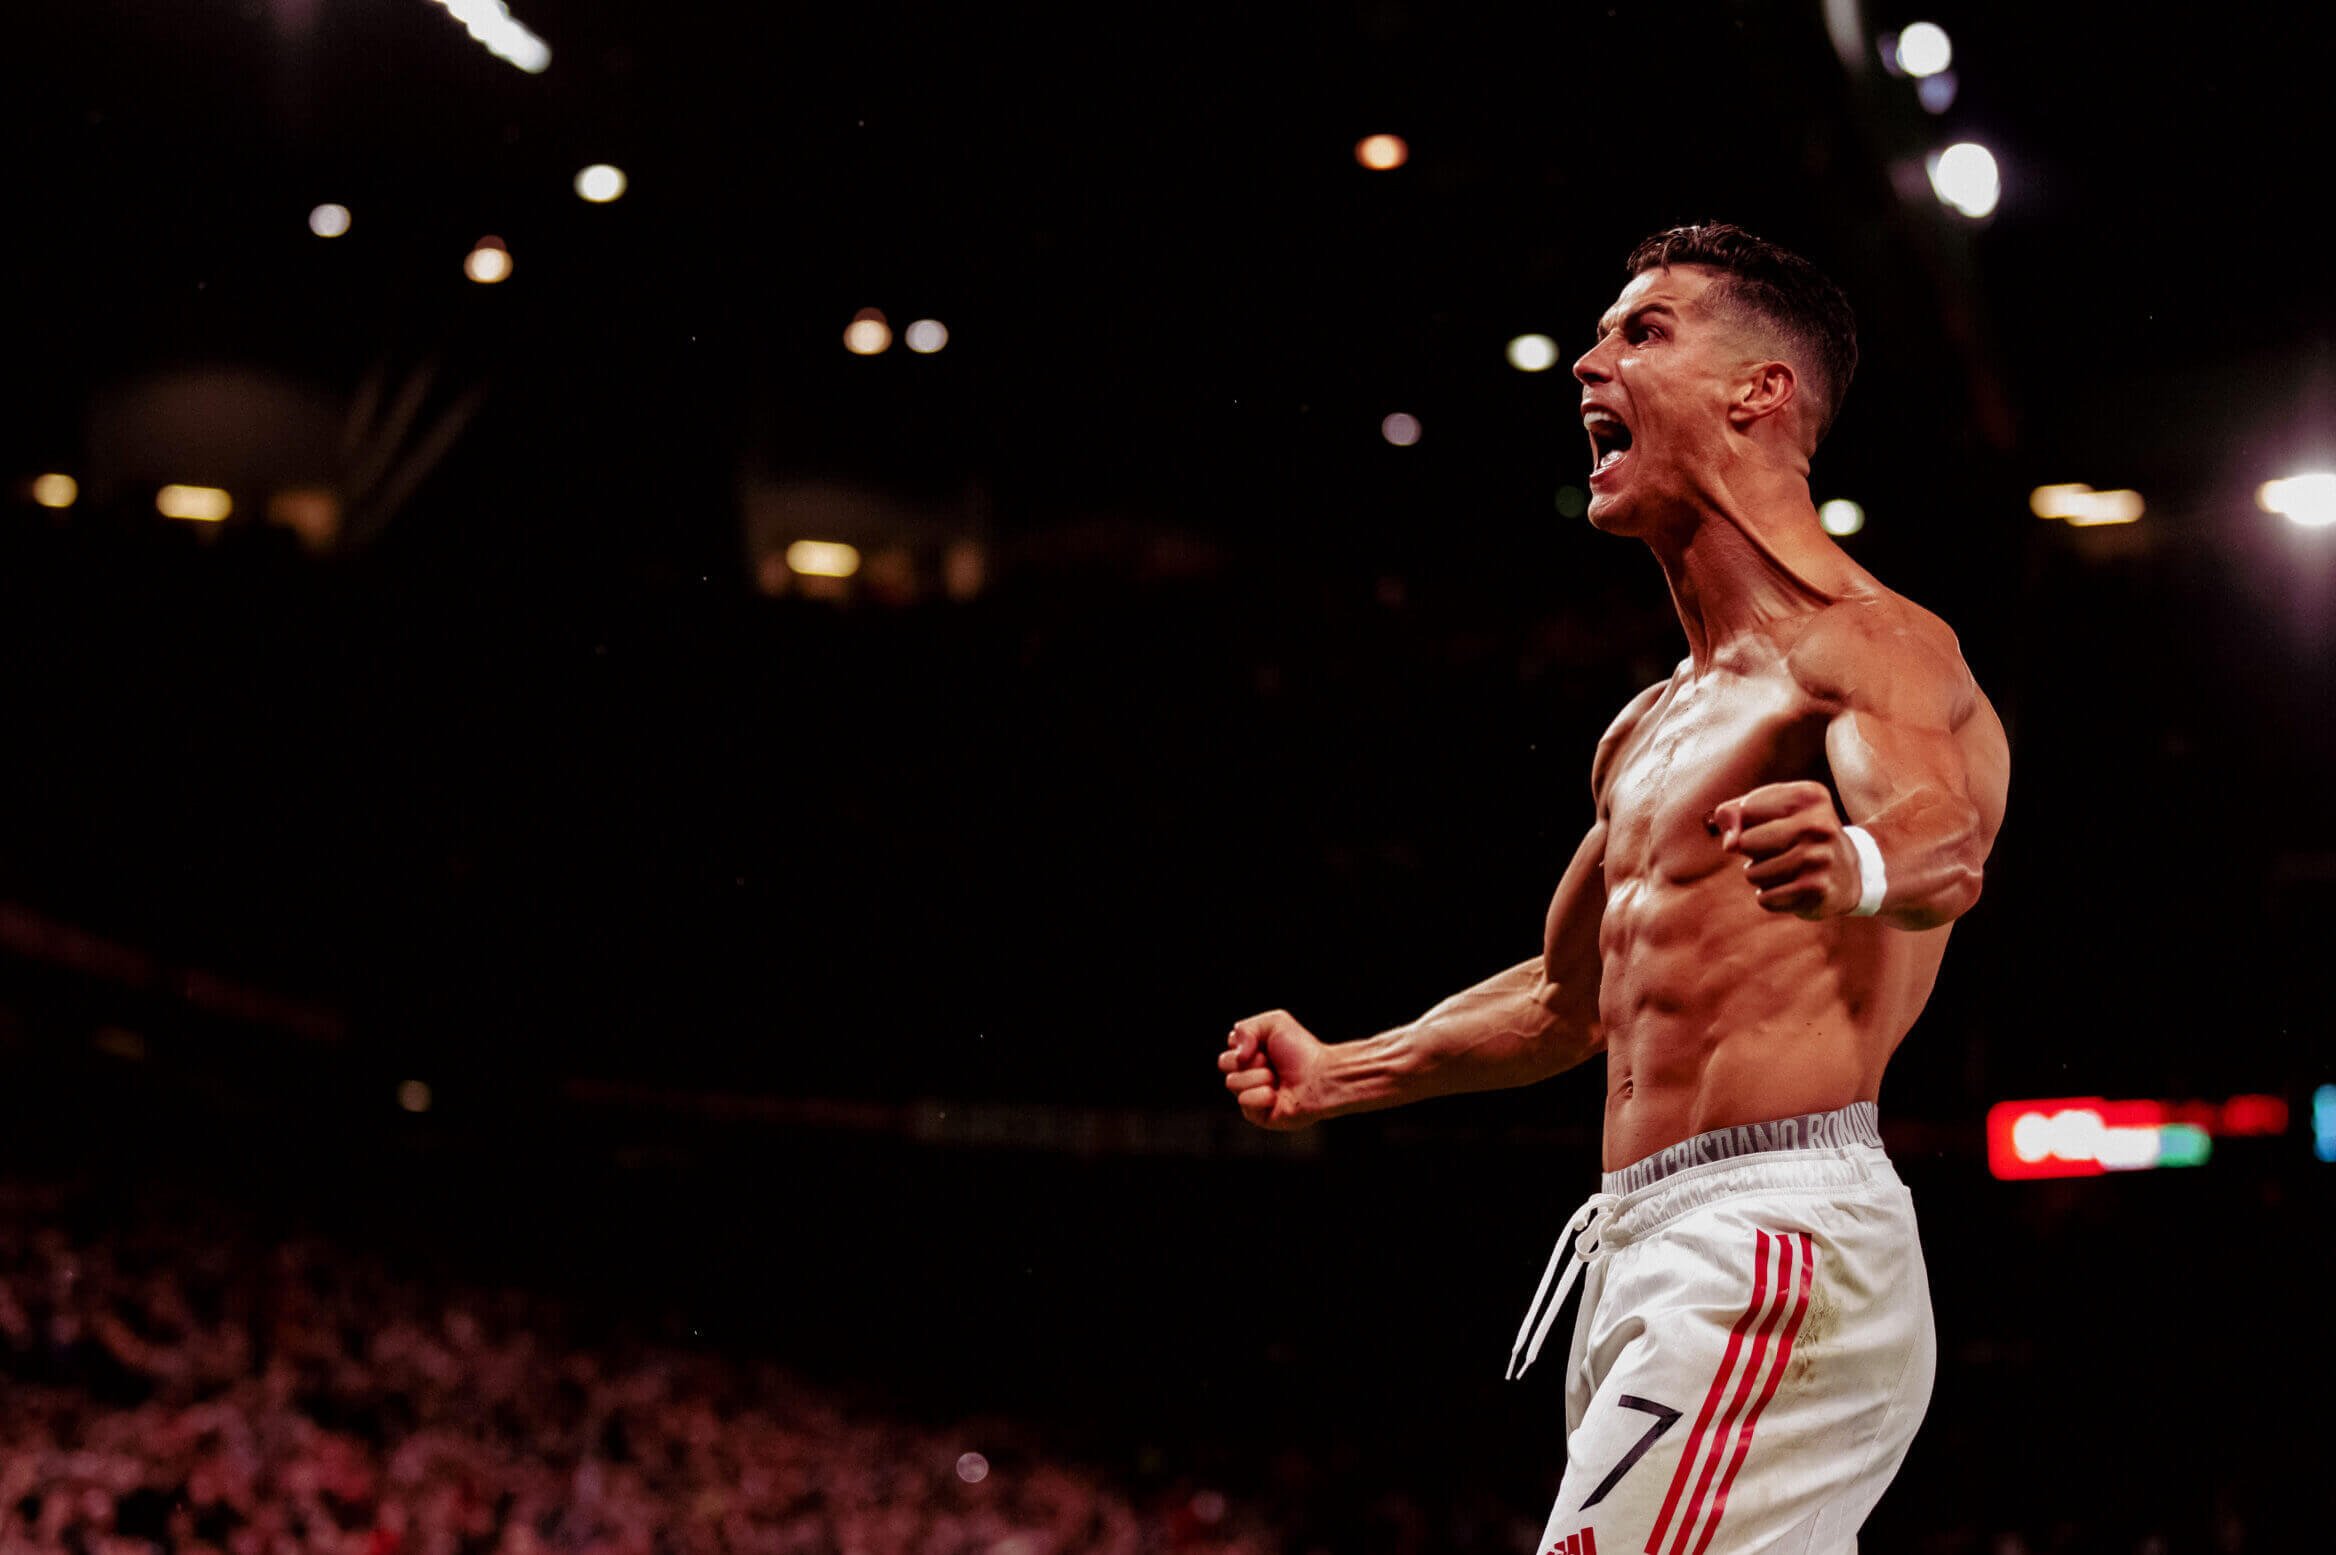 Ronaldo-was-a-match-winner-once-again-for-United-scaled-e1632985577407.jpg